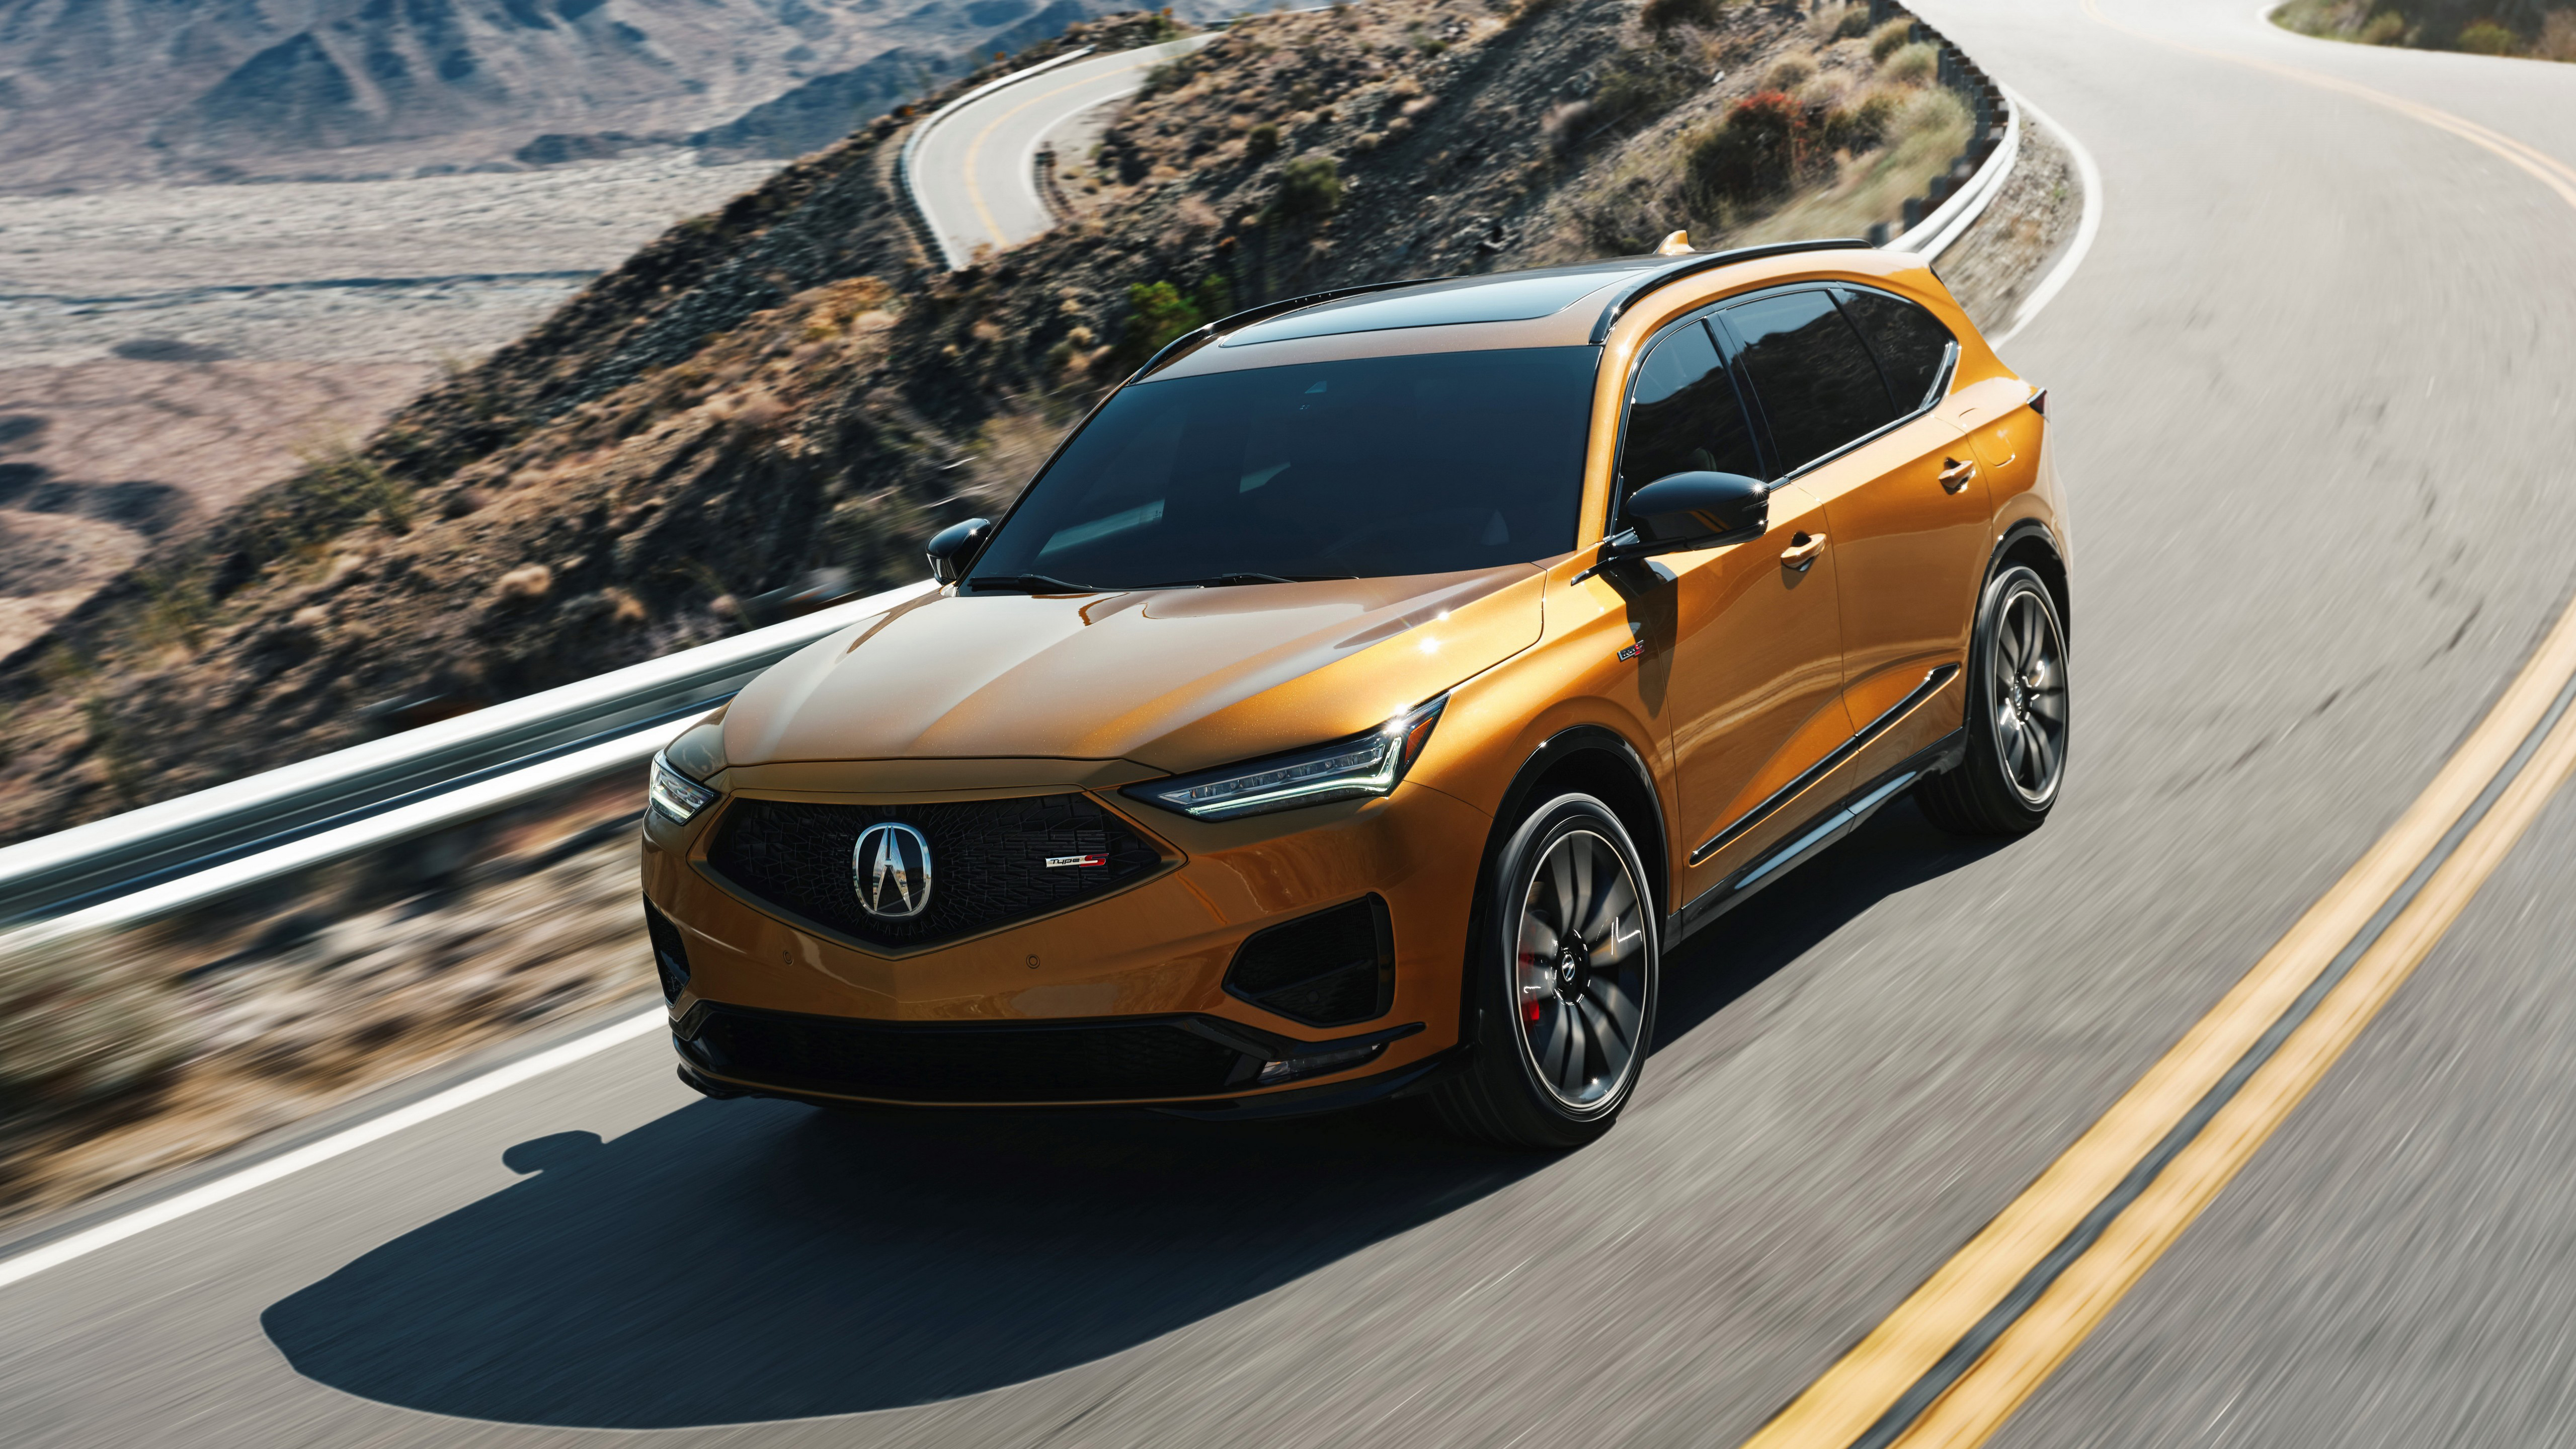 The acura mdx 2022 SUV drives on a country road